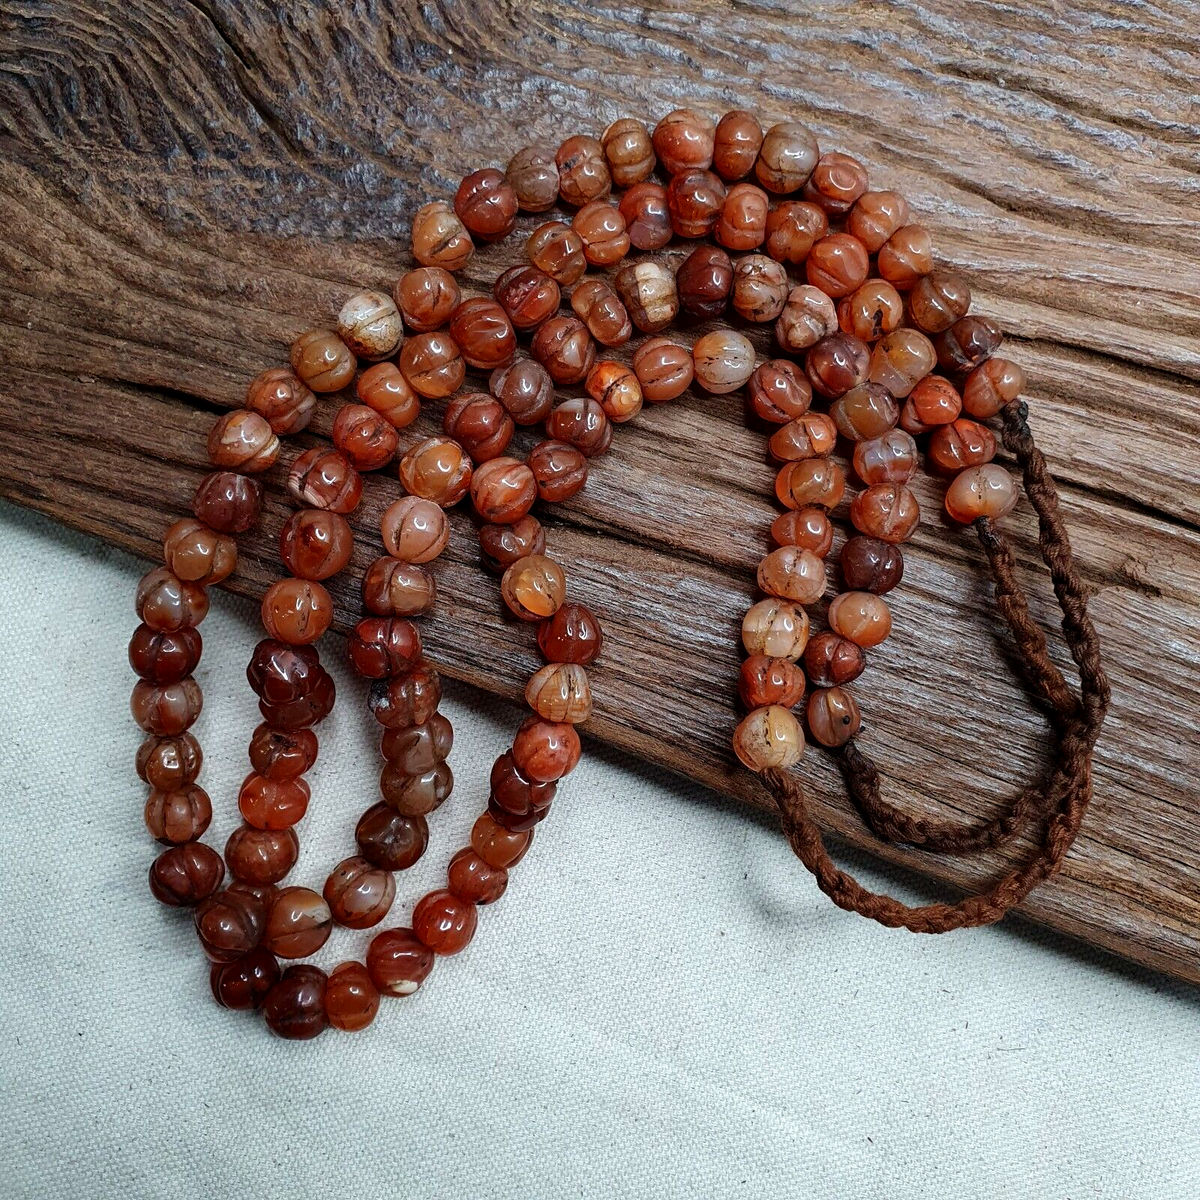 "Two vintage Himalayan Tibetan necklaces featuring melon-shaped carnelian agate beads, showcasing traditional craftsmanship and earthy elegance. Perfect for layering or gifting, these unique pieces of jewelry offer a glimpse into Tibetan culture and history."